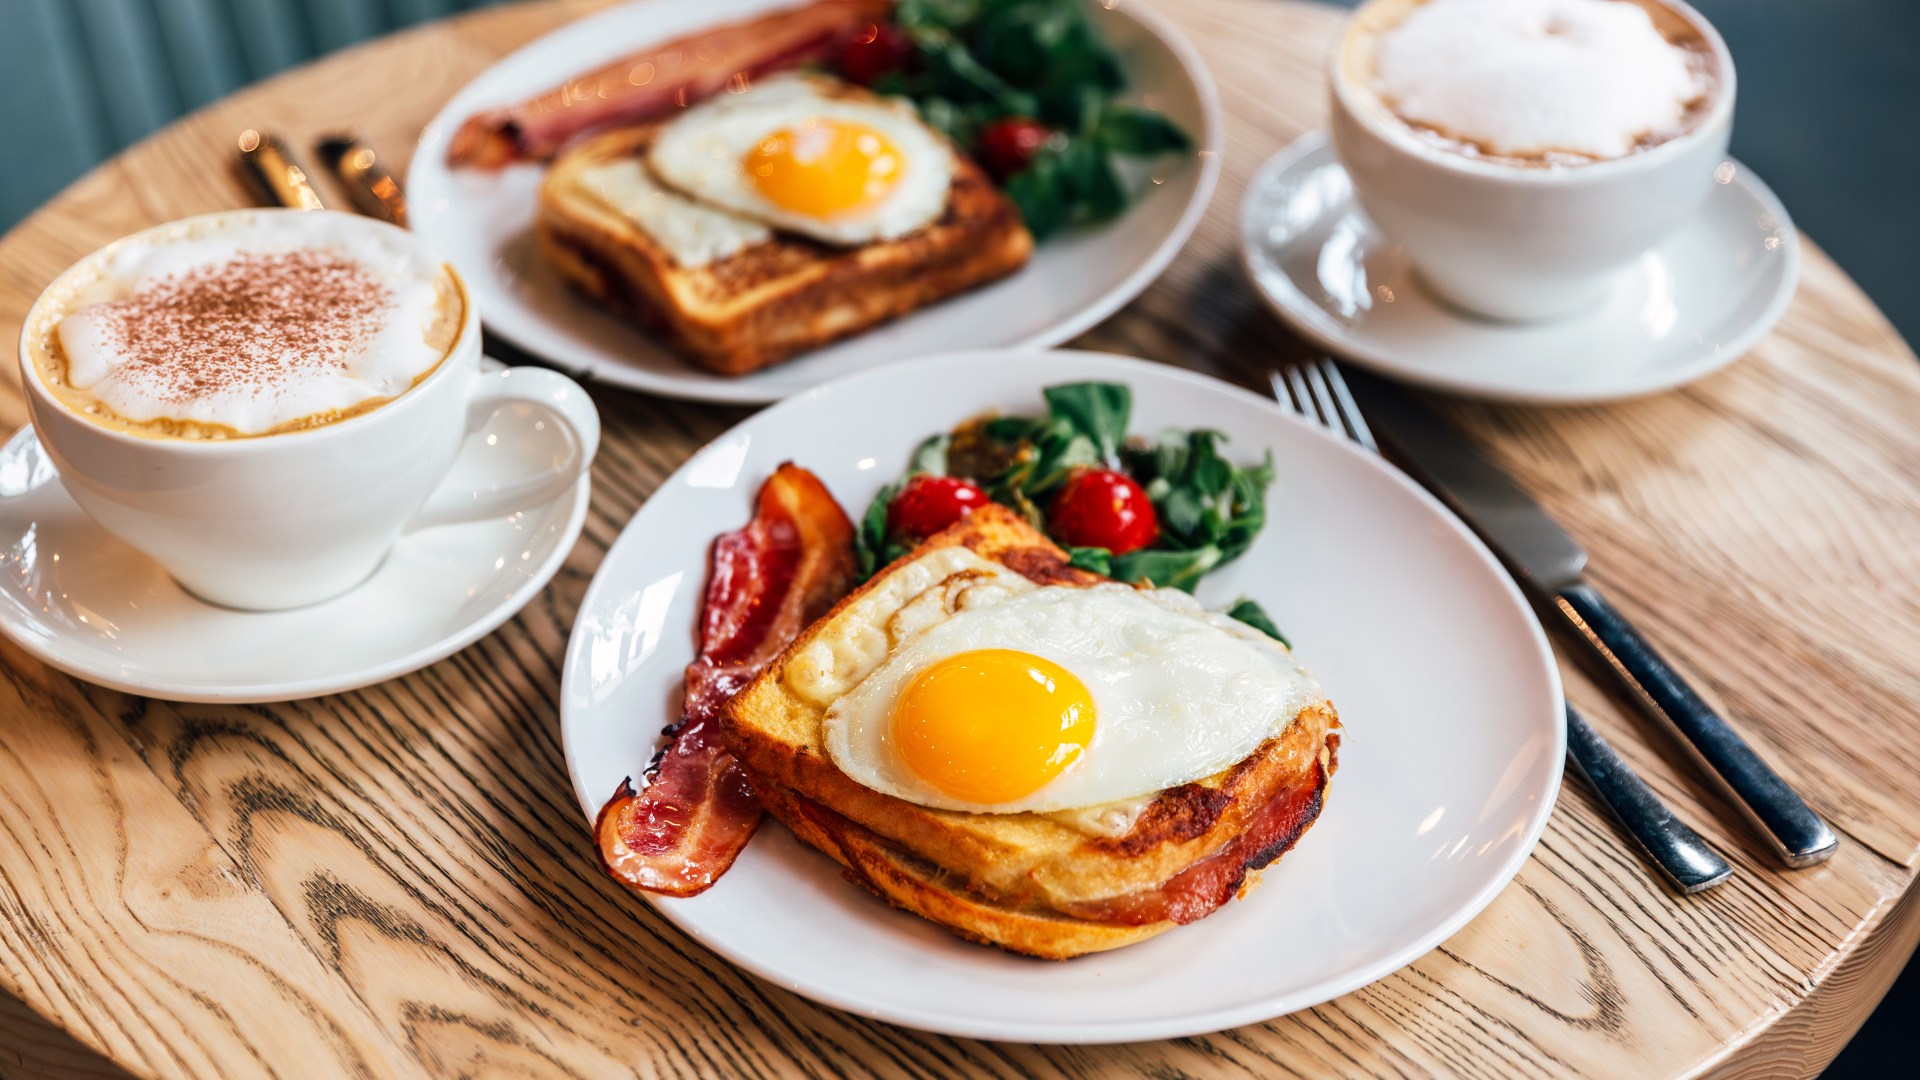 Breakfast staple hit by 20% price rise in a year – and costs are set to surge even further [Video]